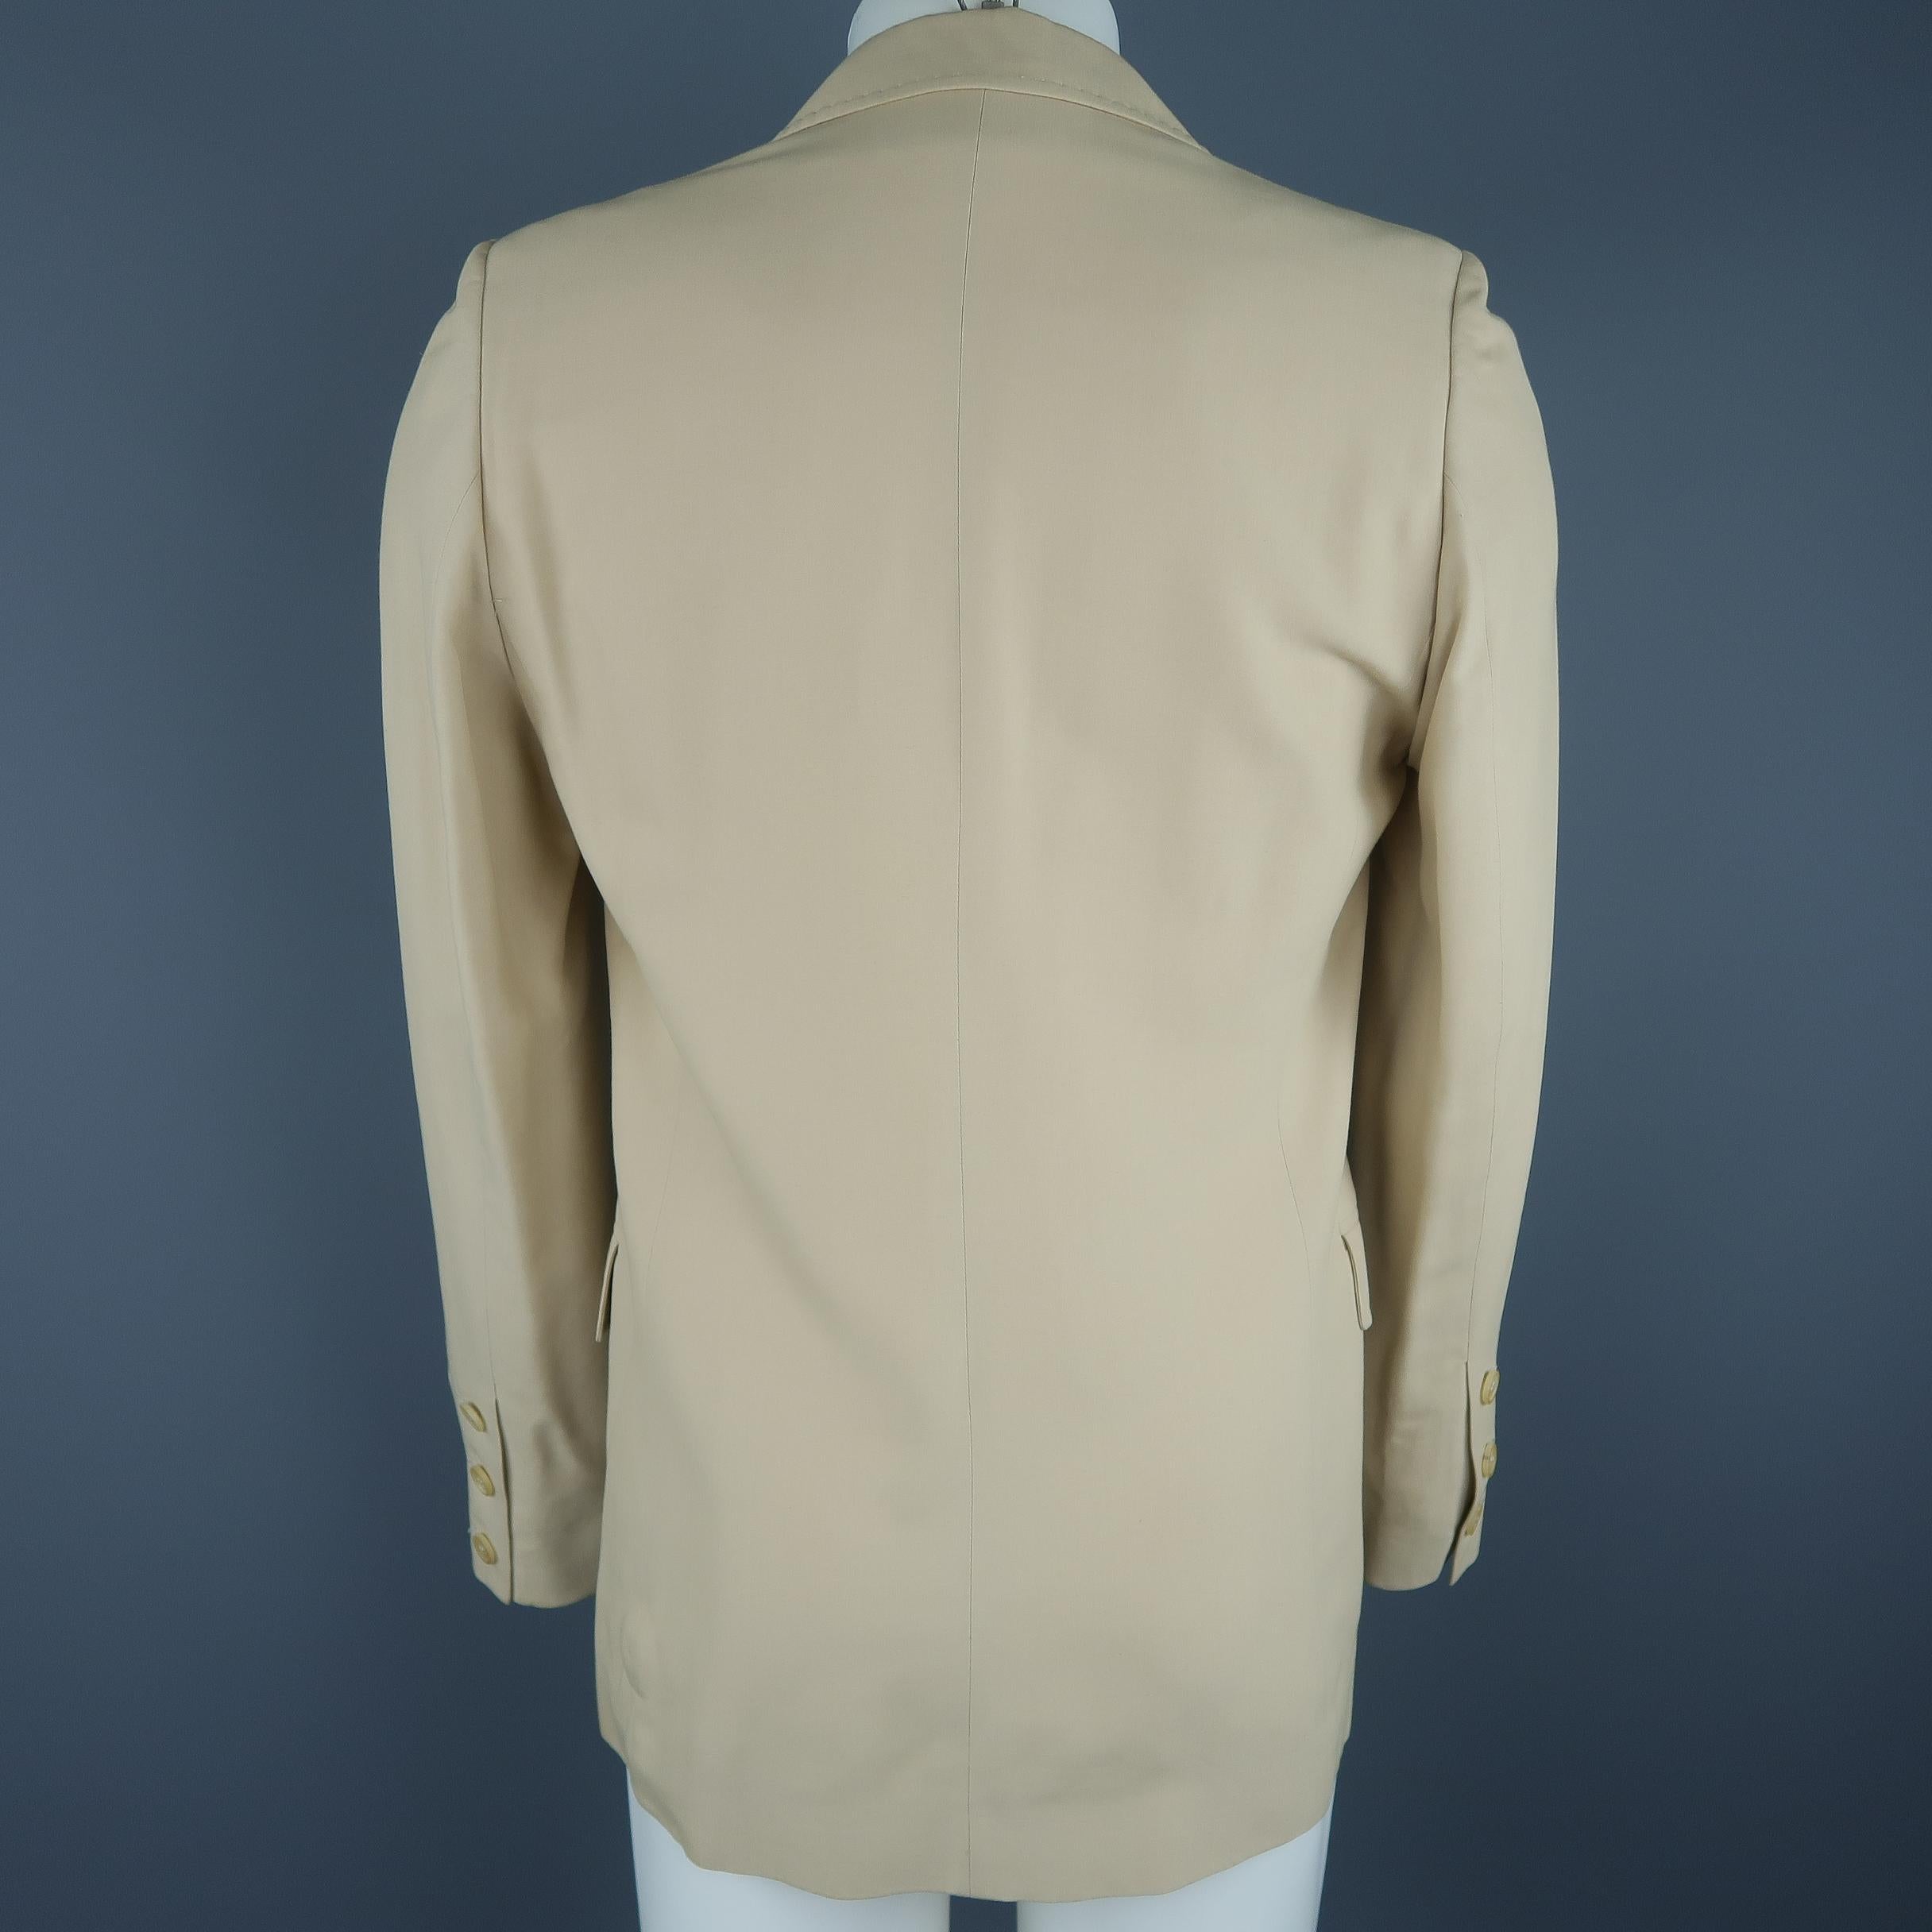 ANN DEMEULEMEESTER 38 Khaki Rayon / Cotton Notch Lapel Sport Coat In Excellent Condition In San Francisco, CA